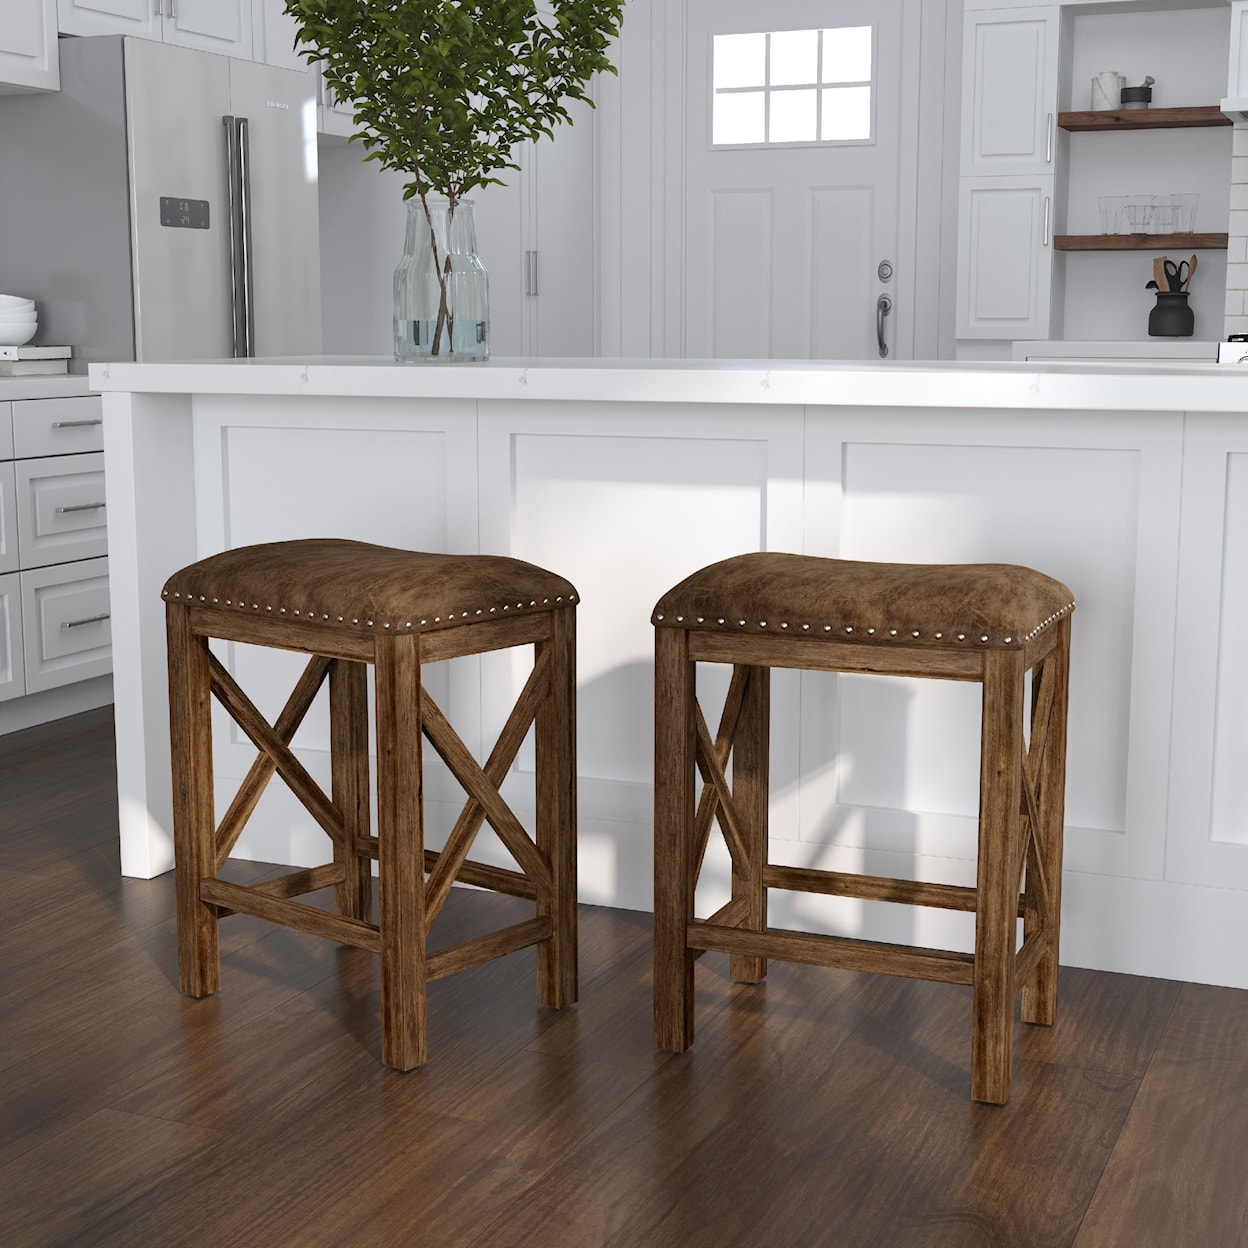 Hillsdale Willow Bend Counter Stool